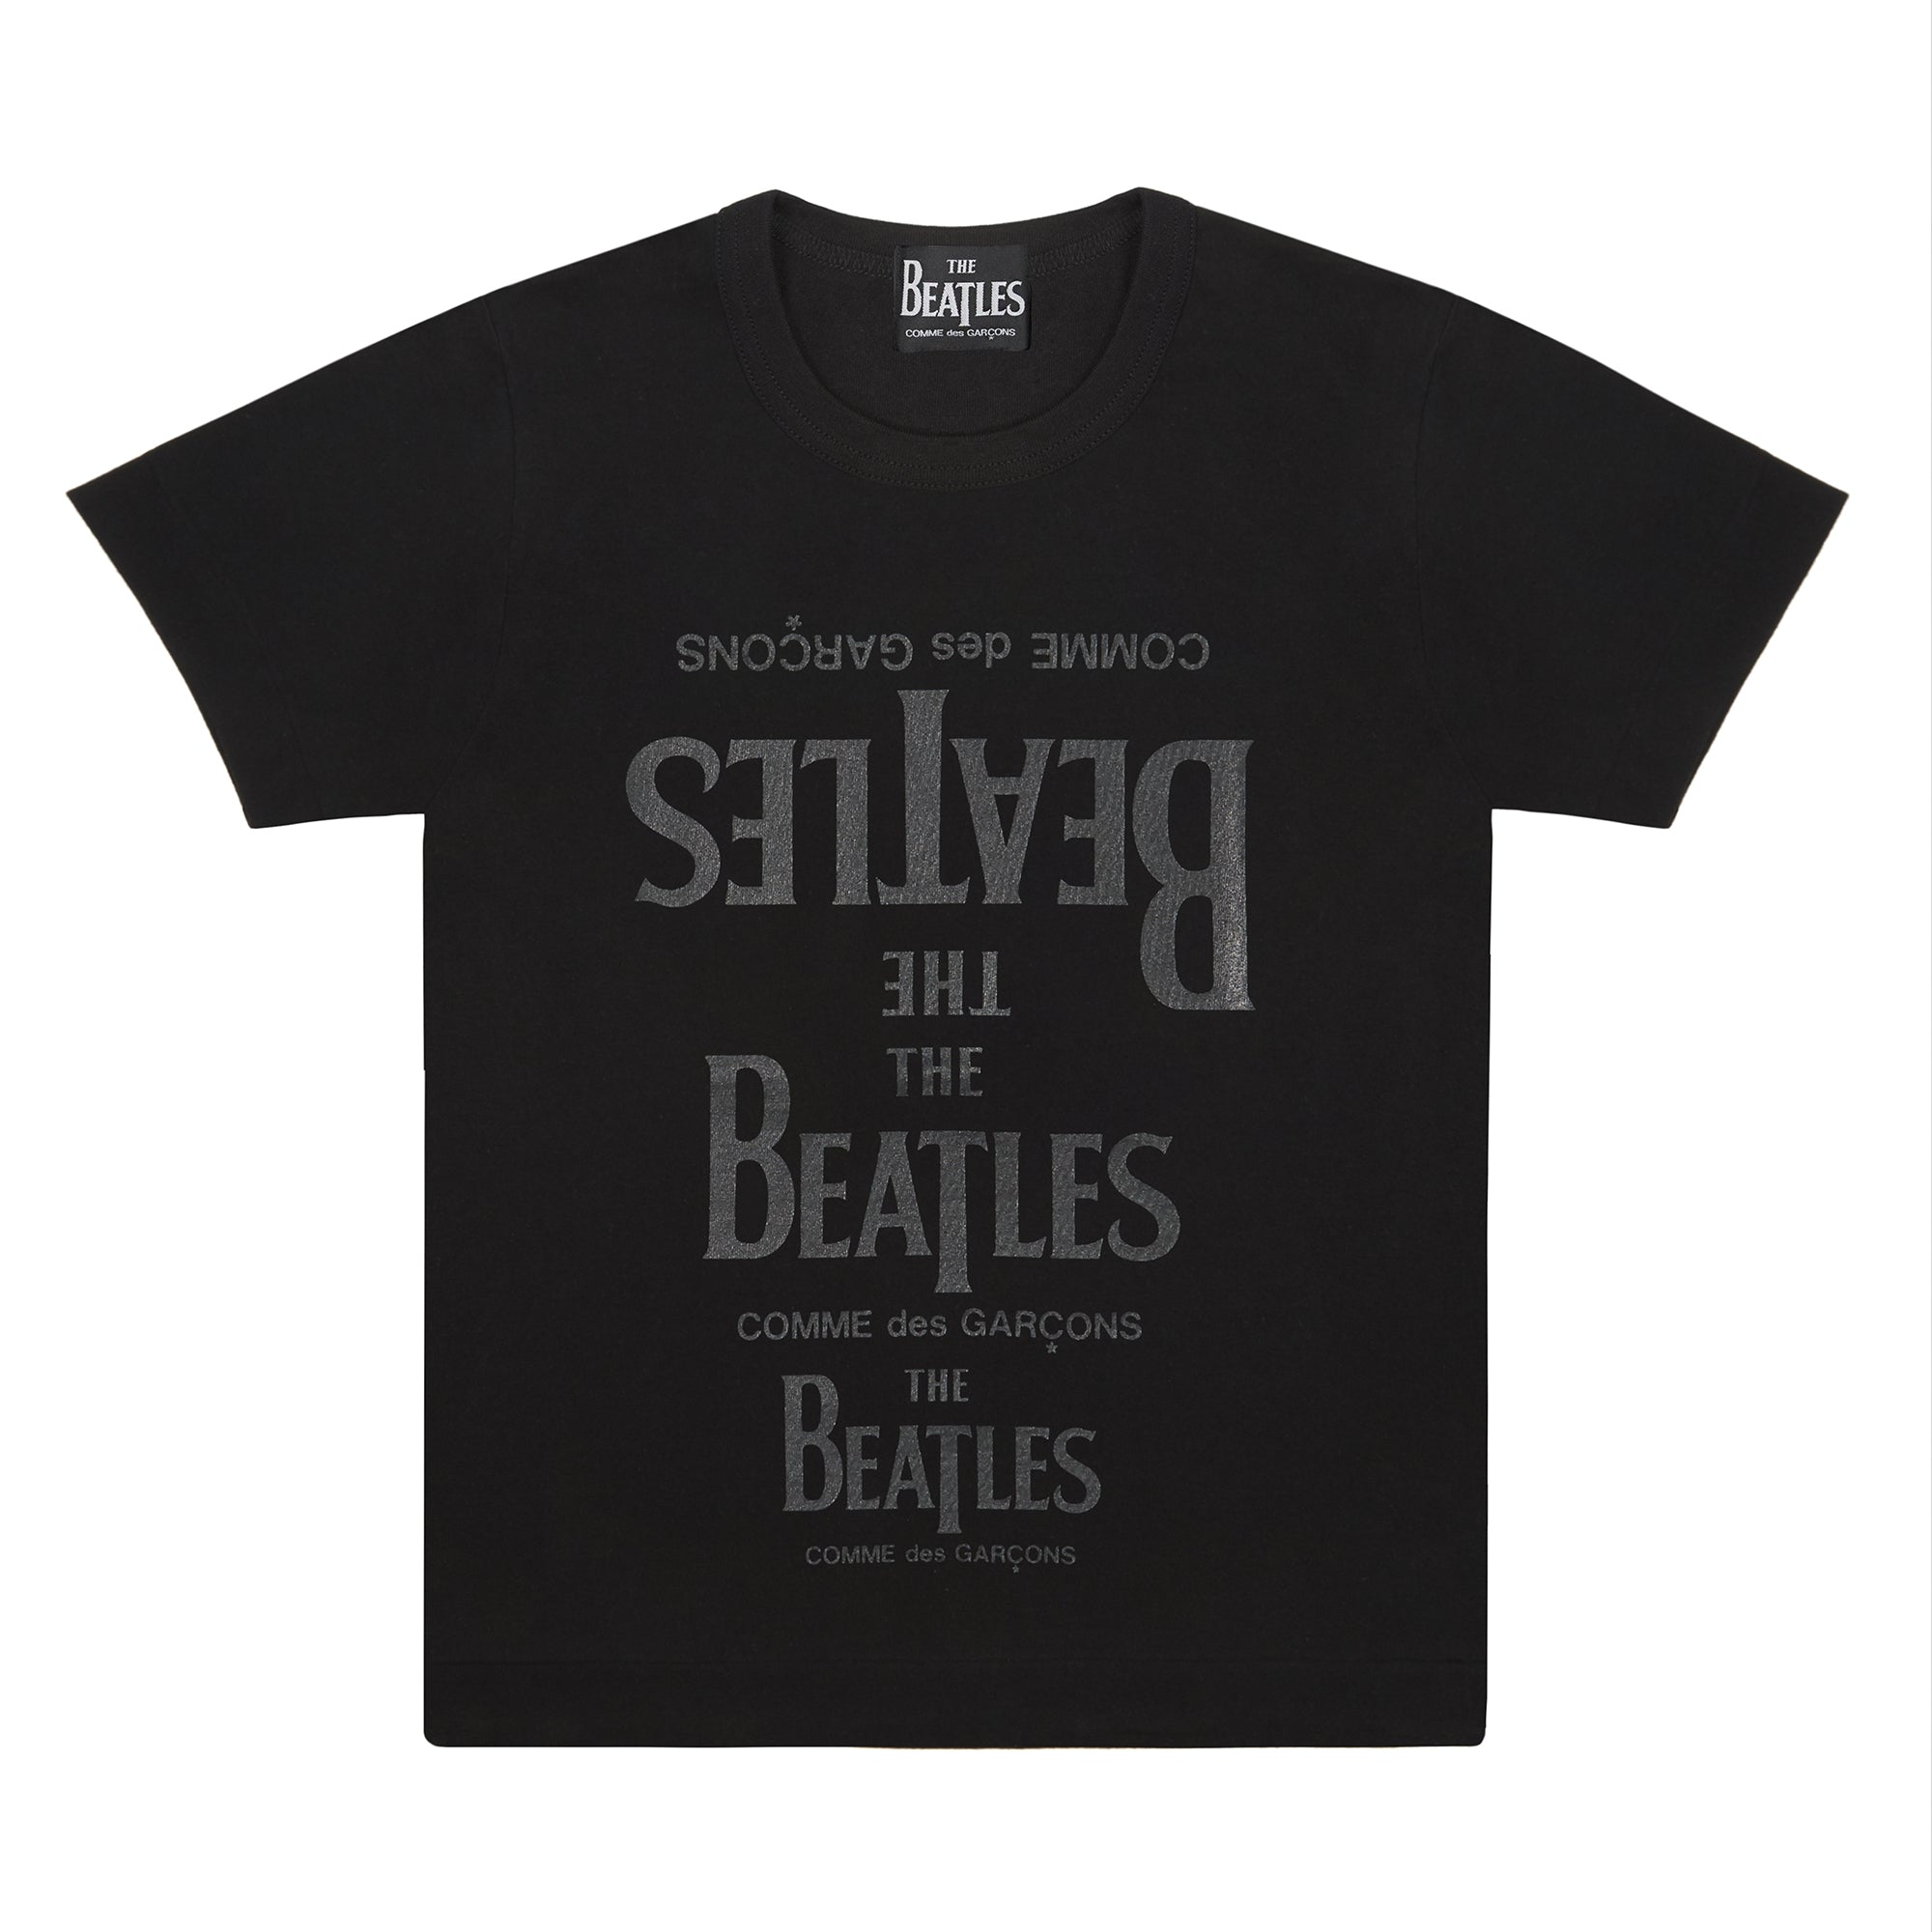 The Beatles CDG - Rubber Printed T-Shirt Black - (VT-T001-051) view 1